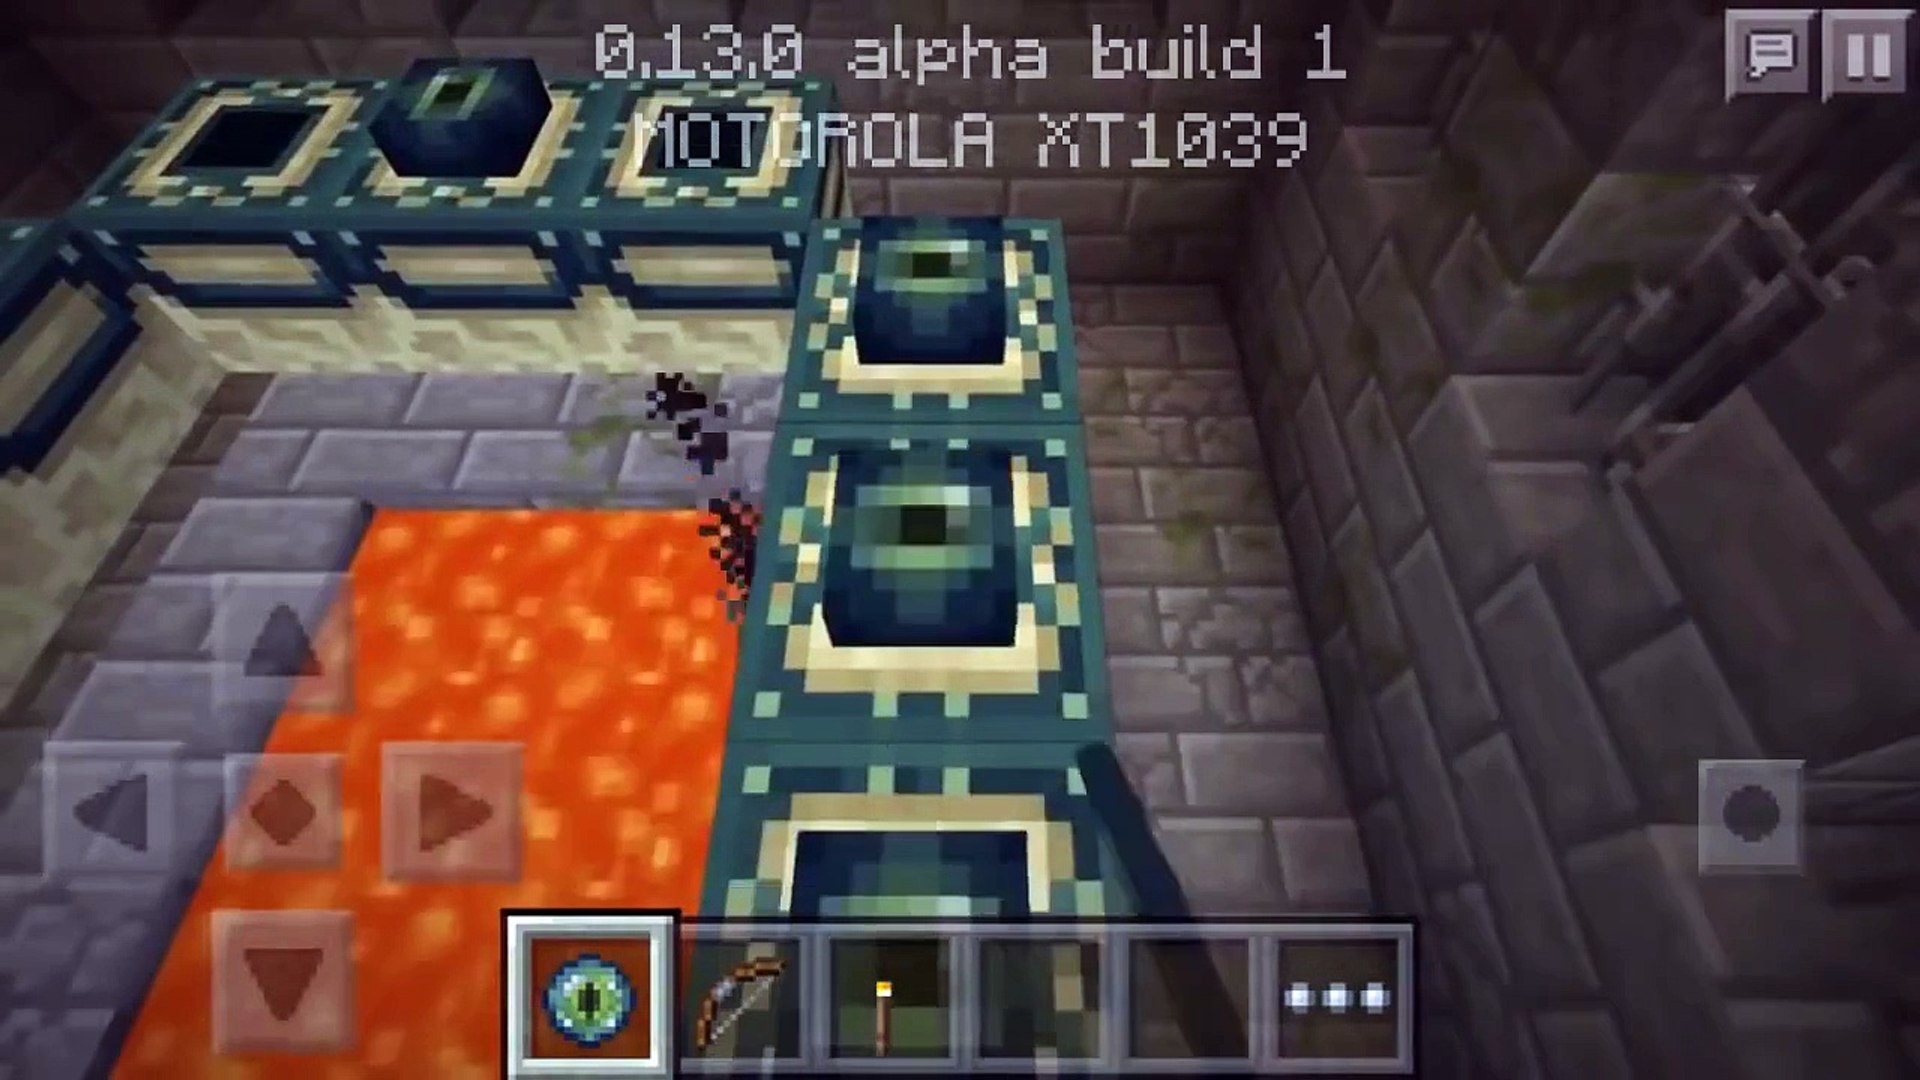 Minecraft PE/Pocket Edition 0.14.0 Alpha Build 1 Update! APK FREE DOWNLOAD  LINK! [CONCEPT!!] - Dailymotion Video